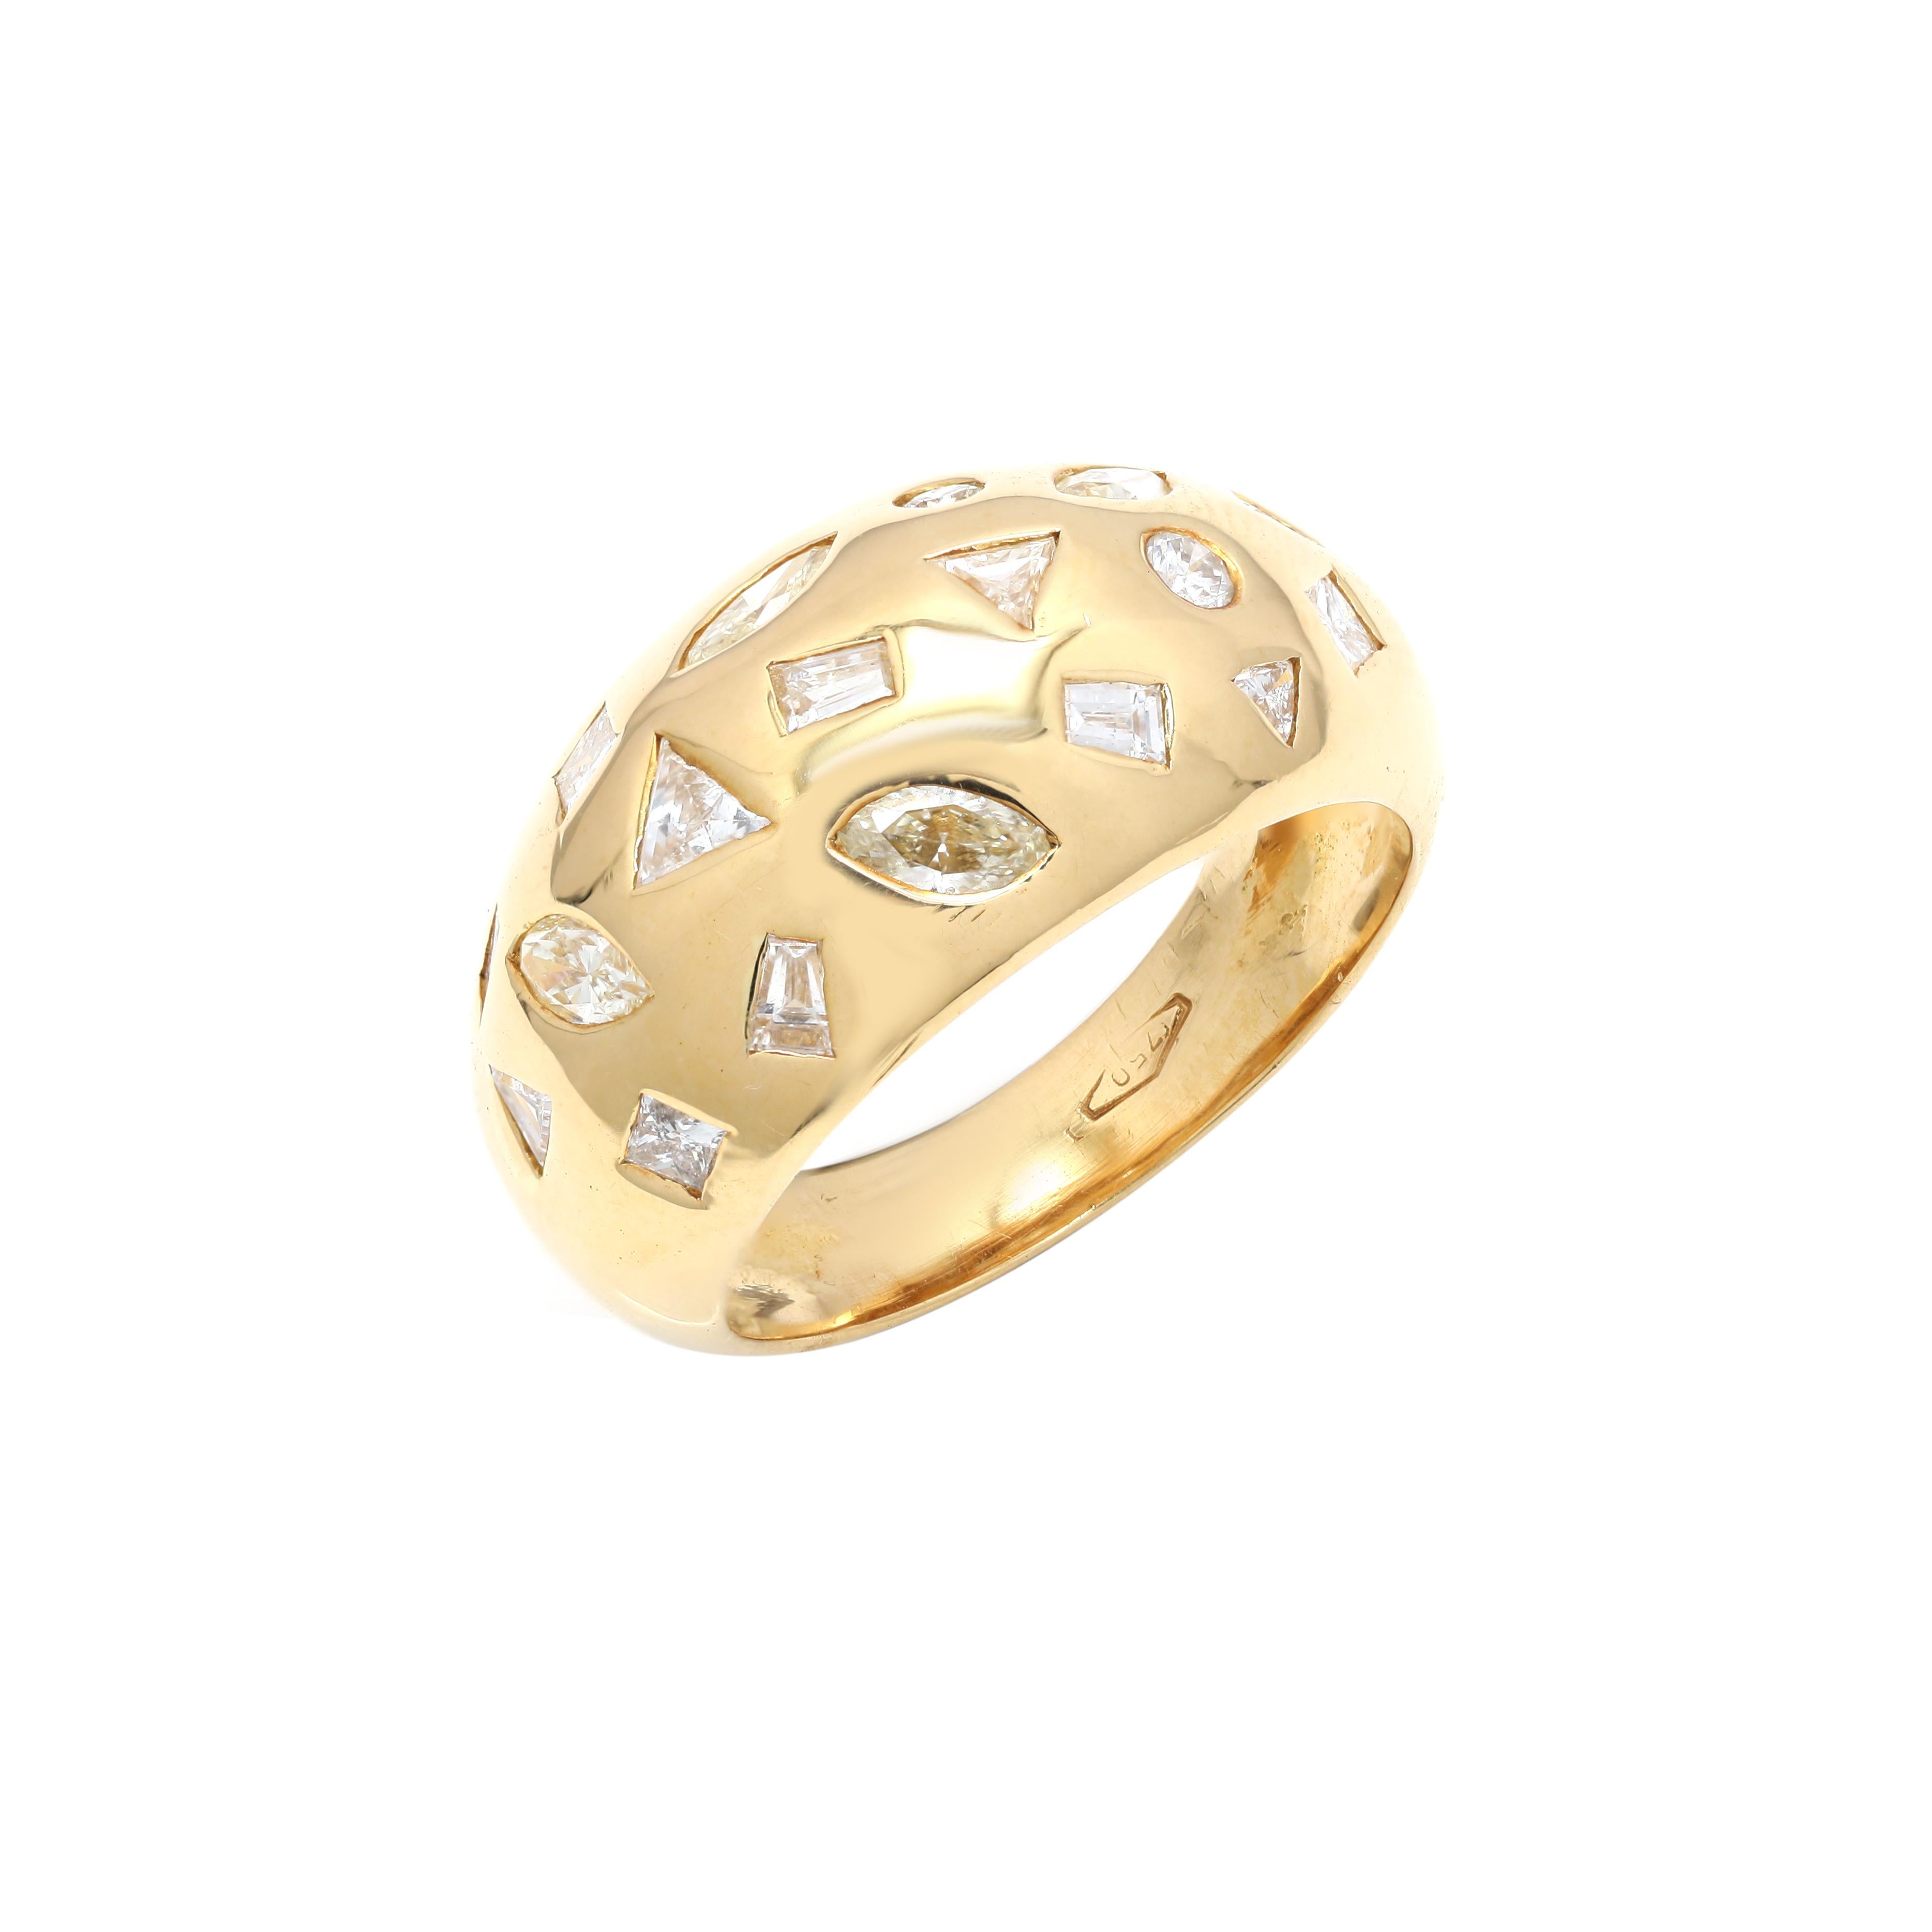 For Sale:  Brilliant 1.2 ct Diamond Studded Dome Ring in Solid 18K Yellow Gold 5